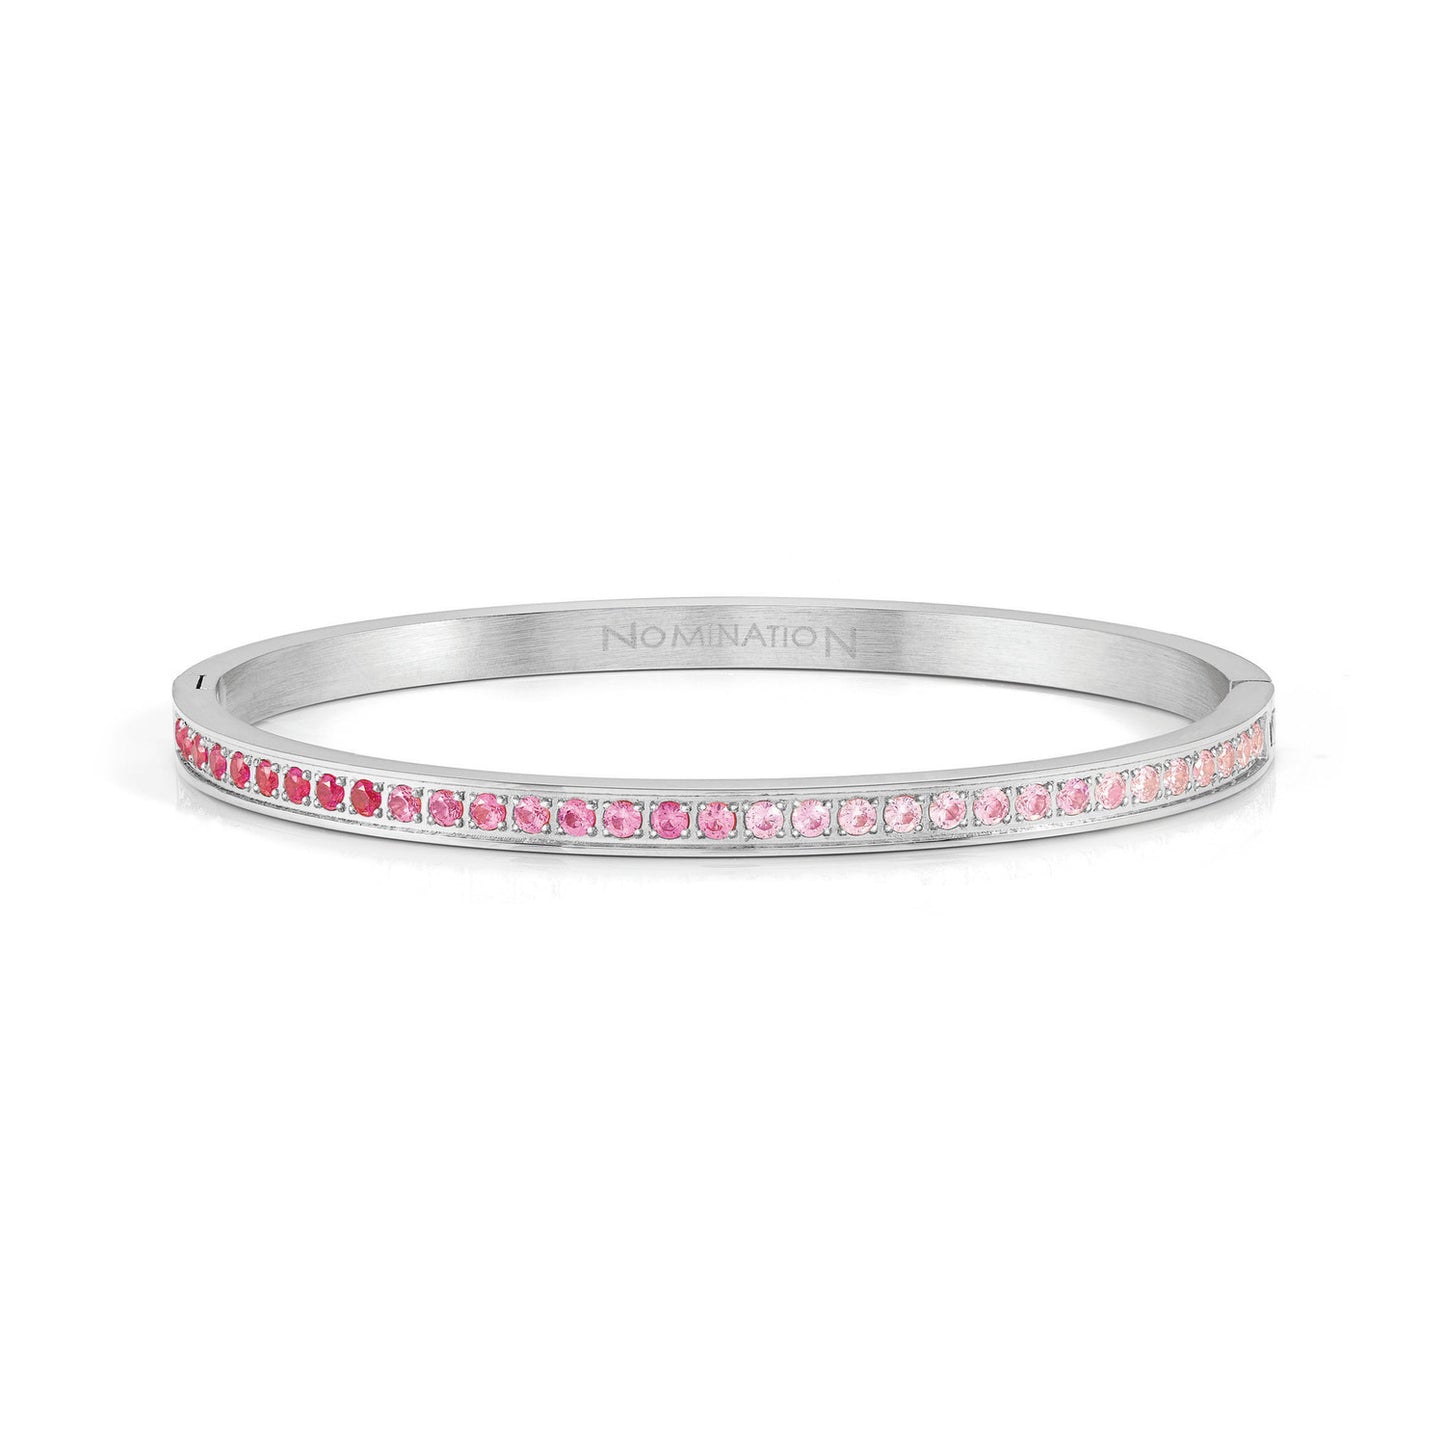 029505/002 PRETTY BANGLES bracelet in steel and cz (SMALL SIZE) (002_PINK)